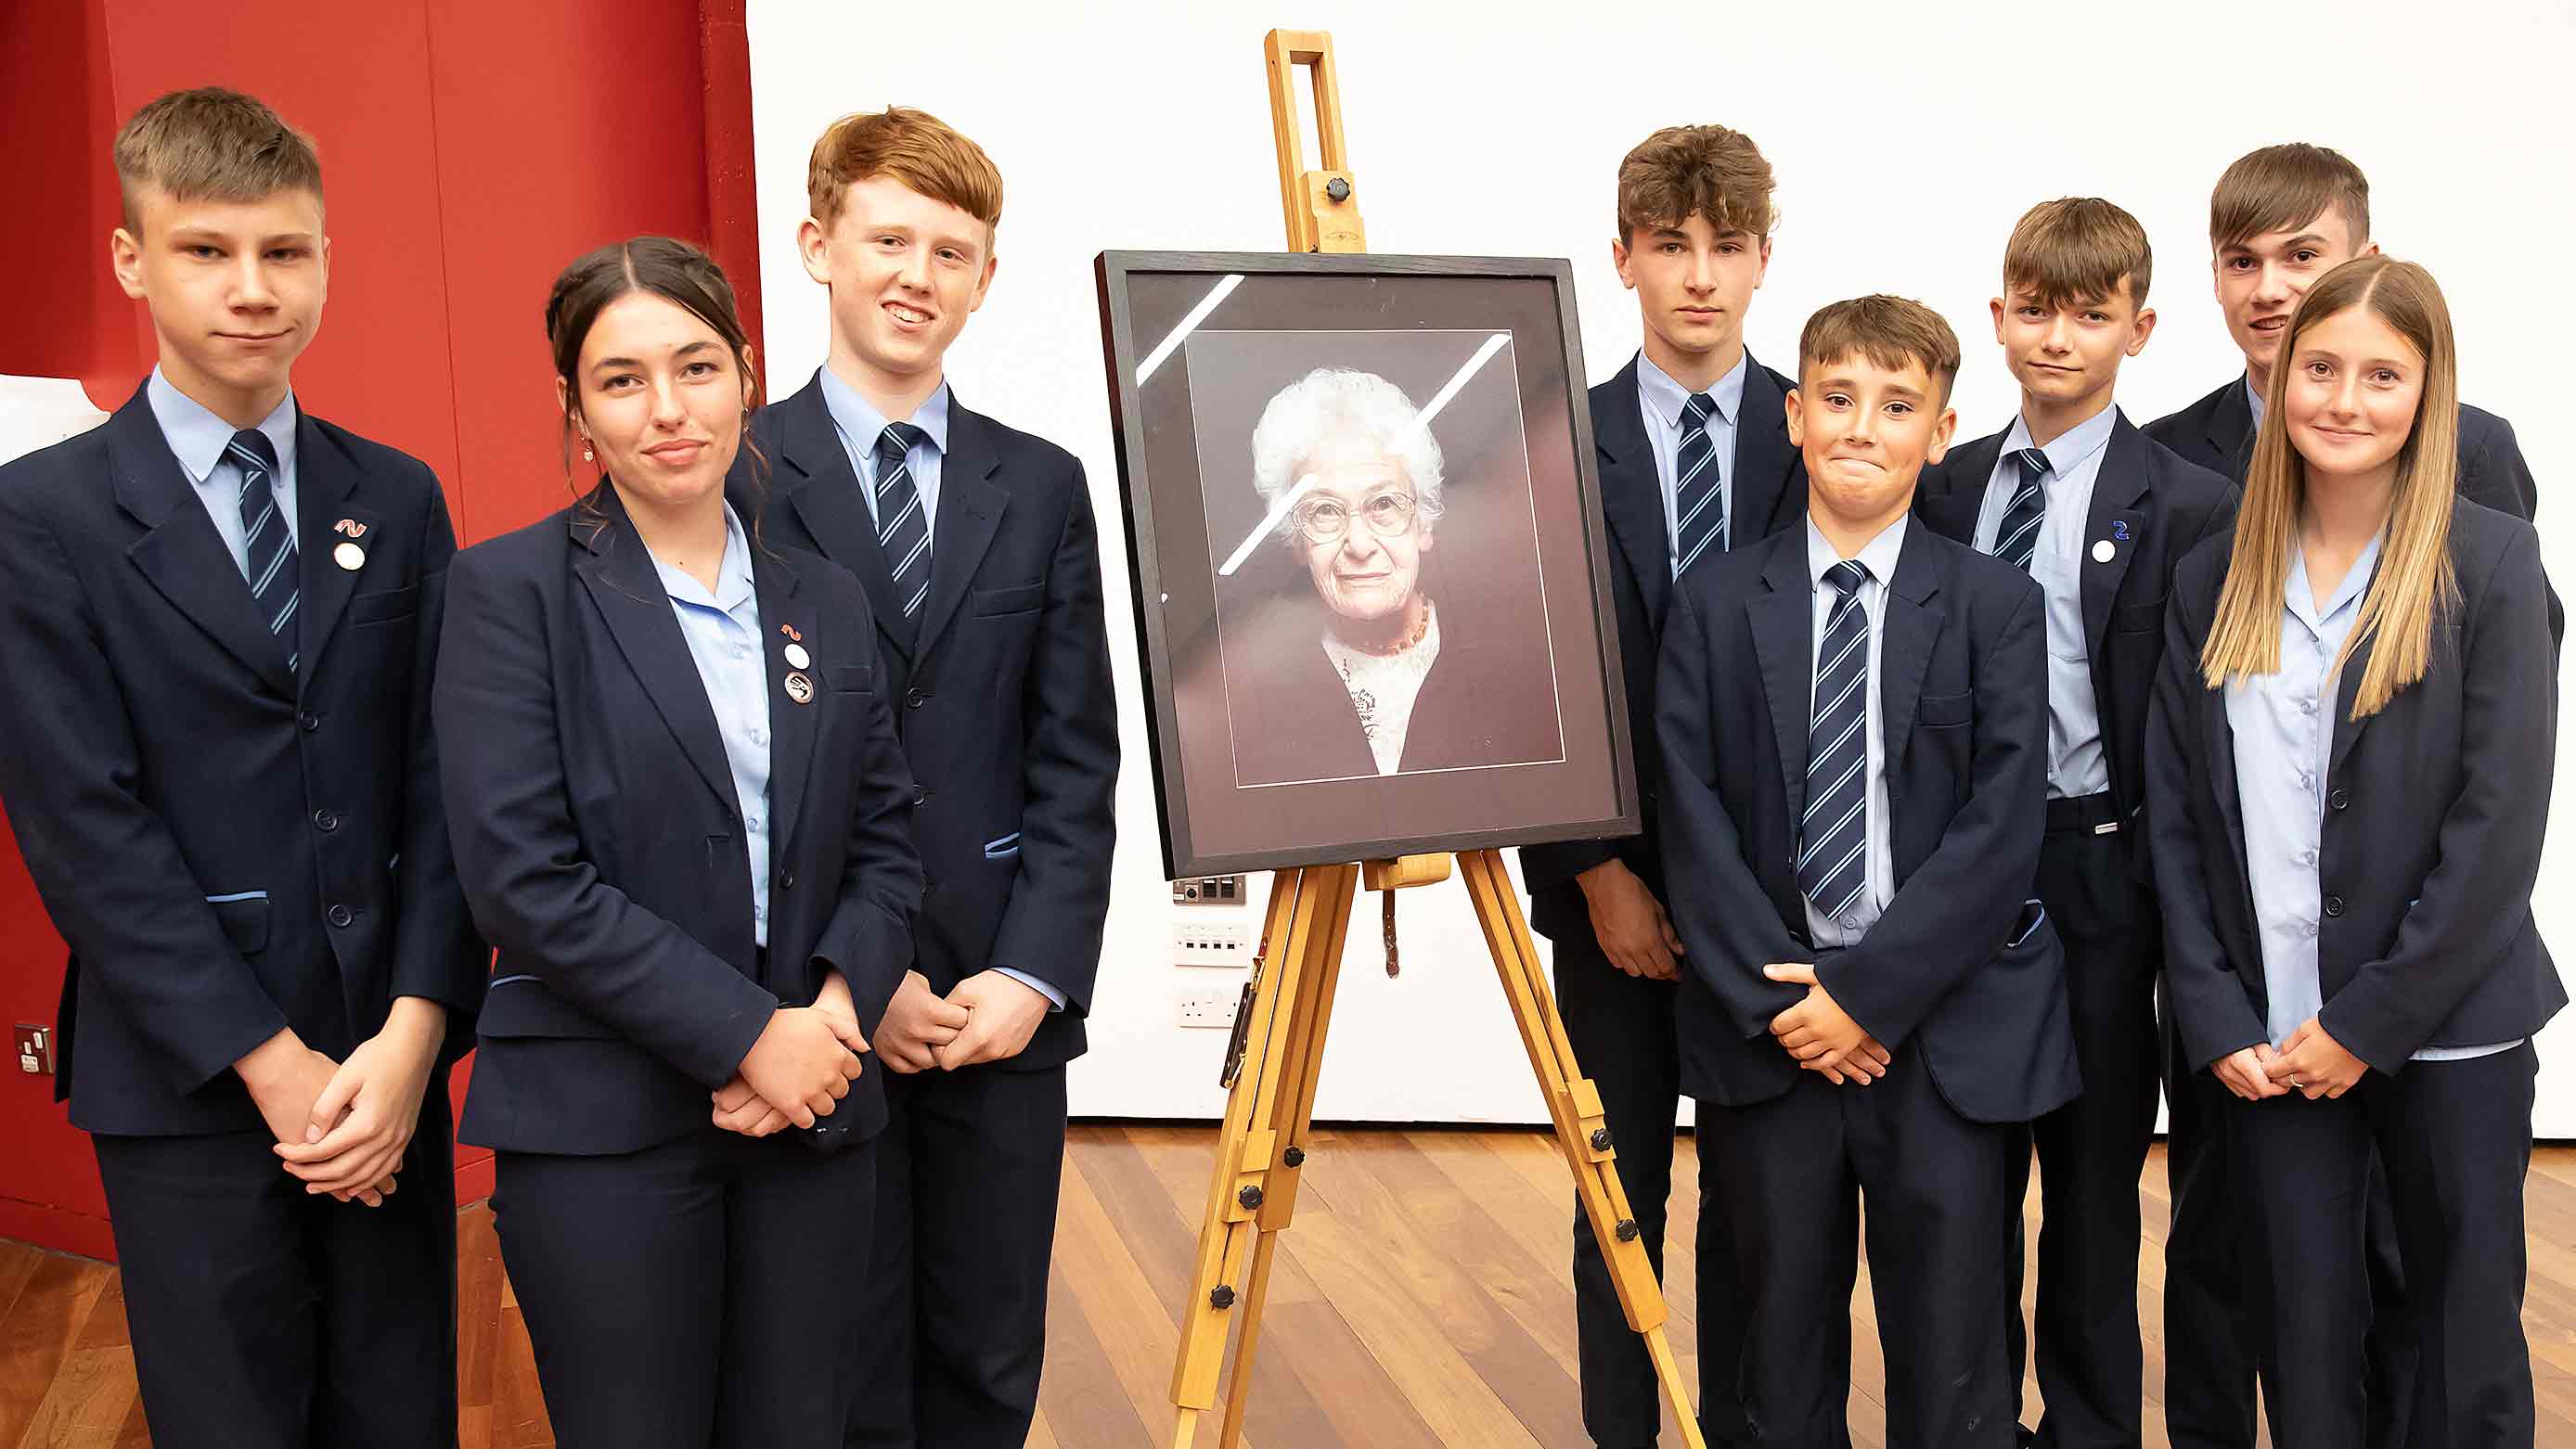 Pupils from Newmarket Academy standing alongside a framed portrait of Dora Love, which is standing on an easel 